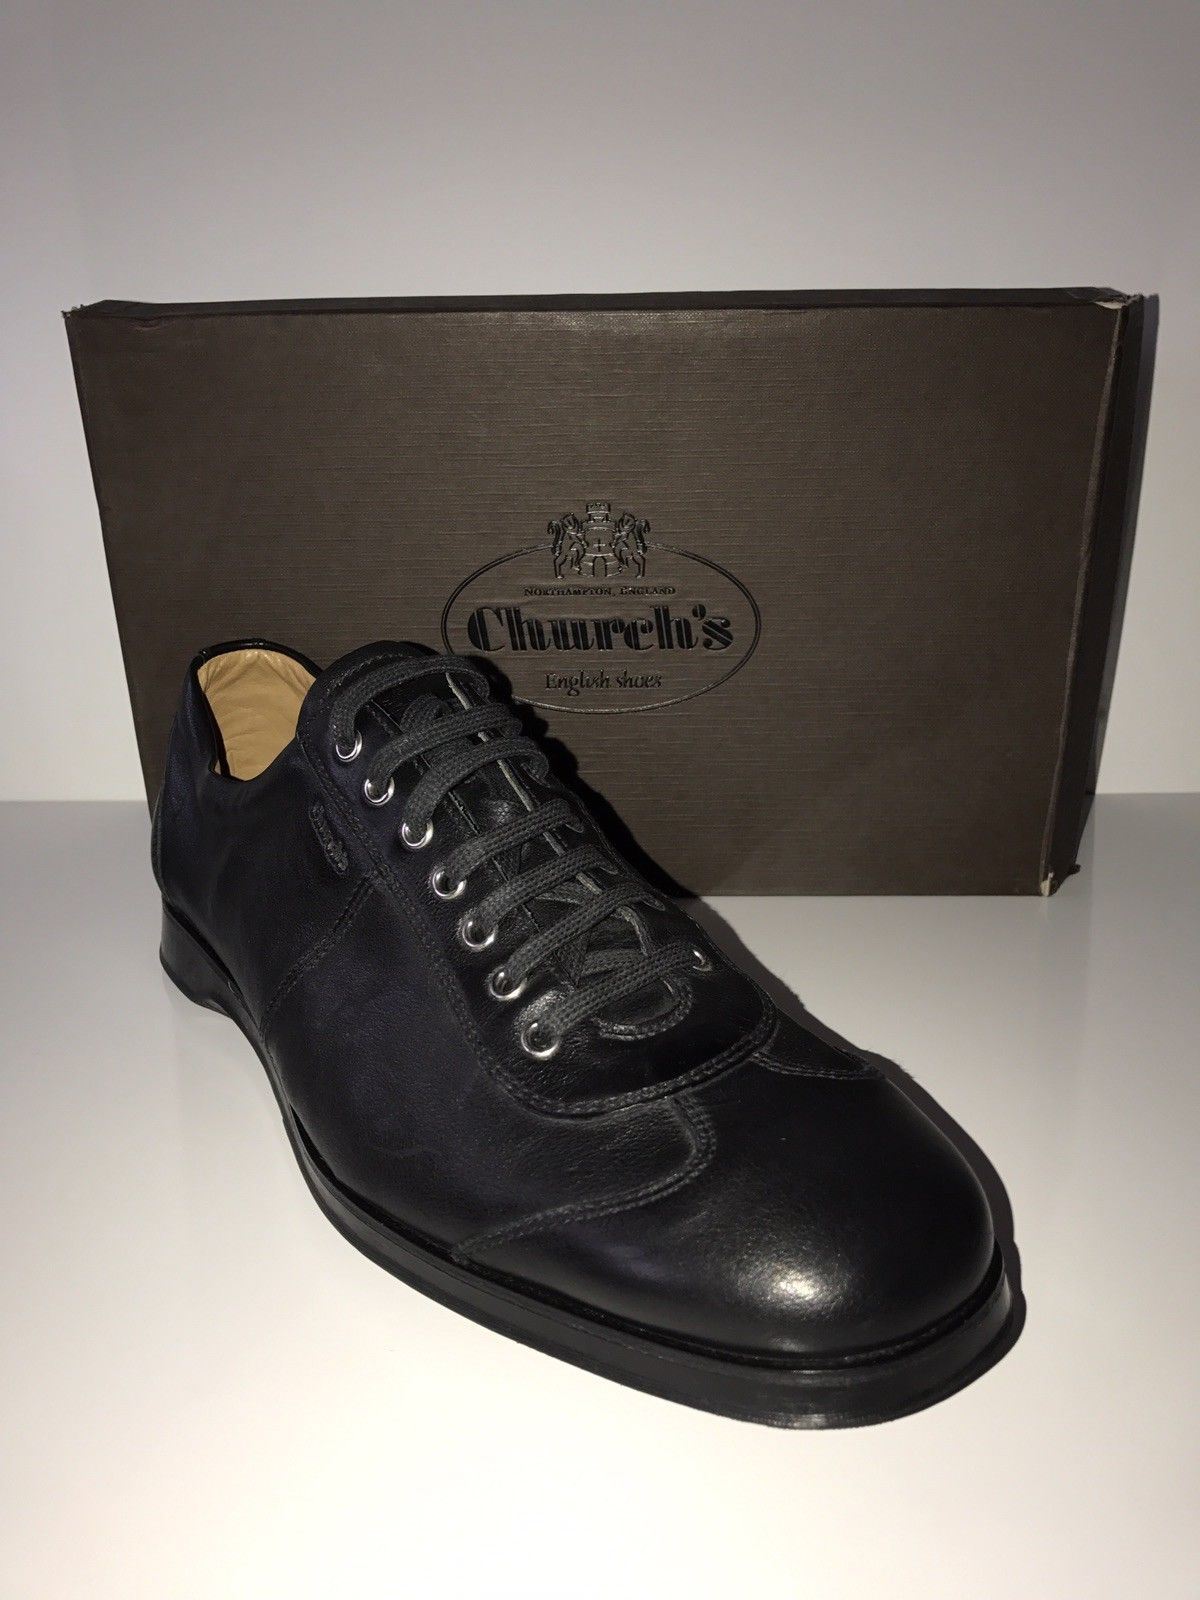 NIB $960 Church's English Shoes Men’s Black Sneakers 12 US Made in Italy